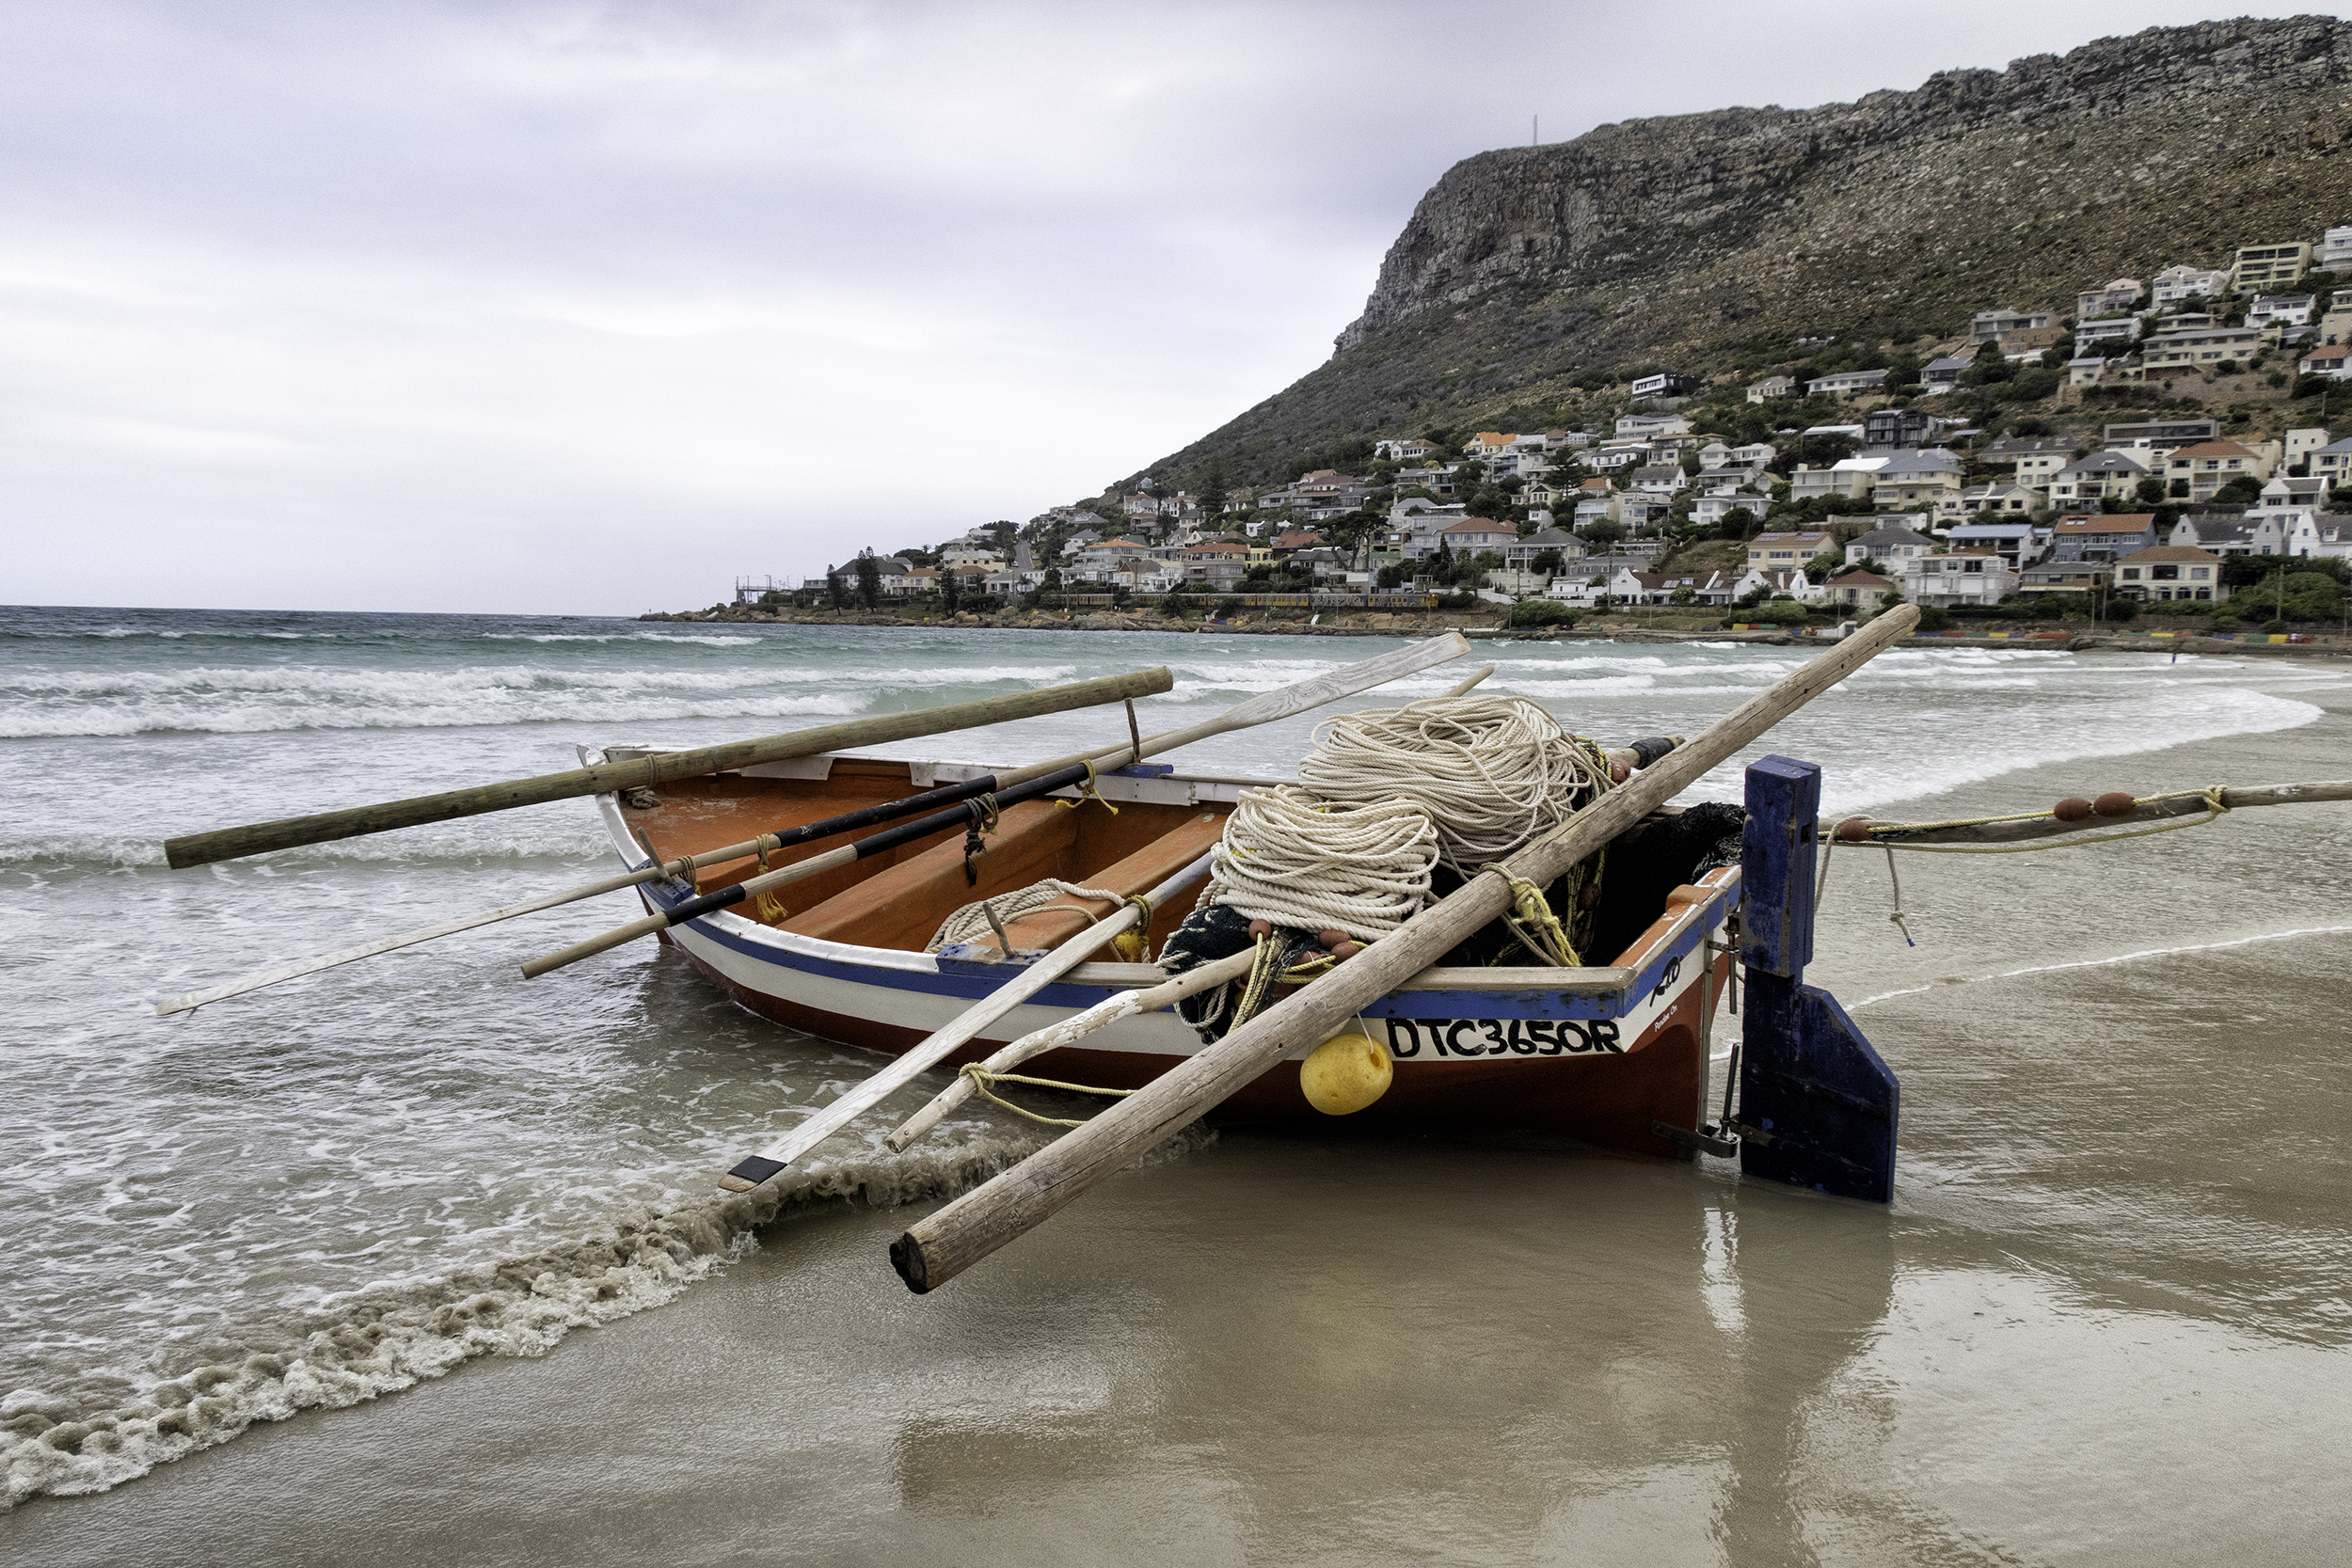 Fish Hoek, Cape Town, South Africa